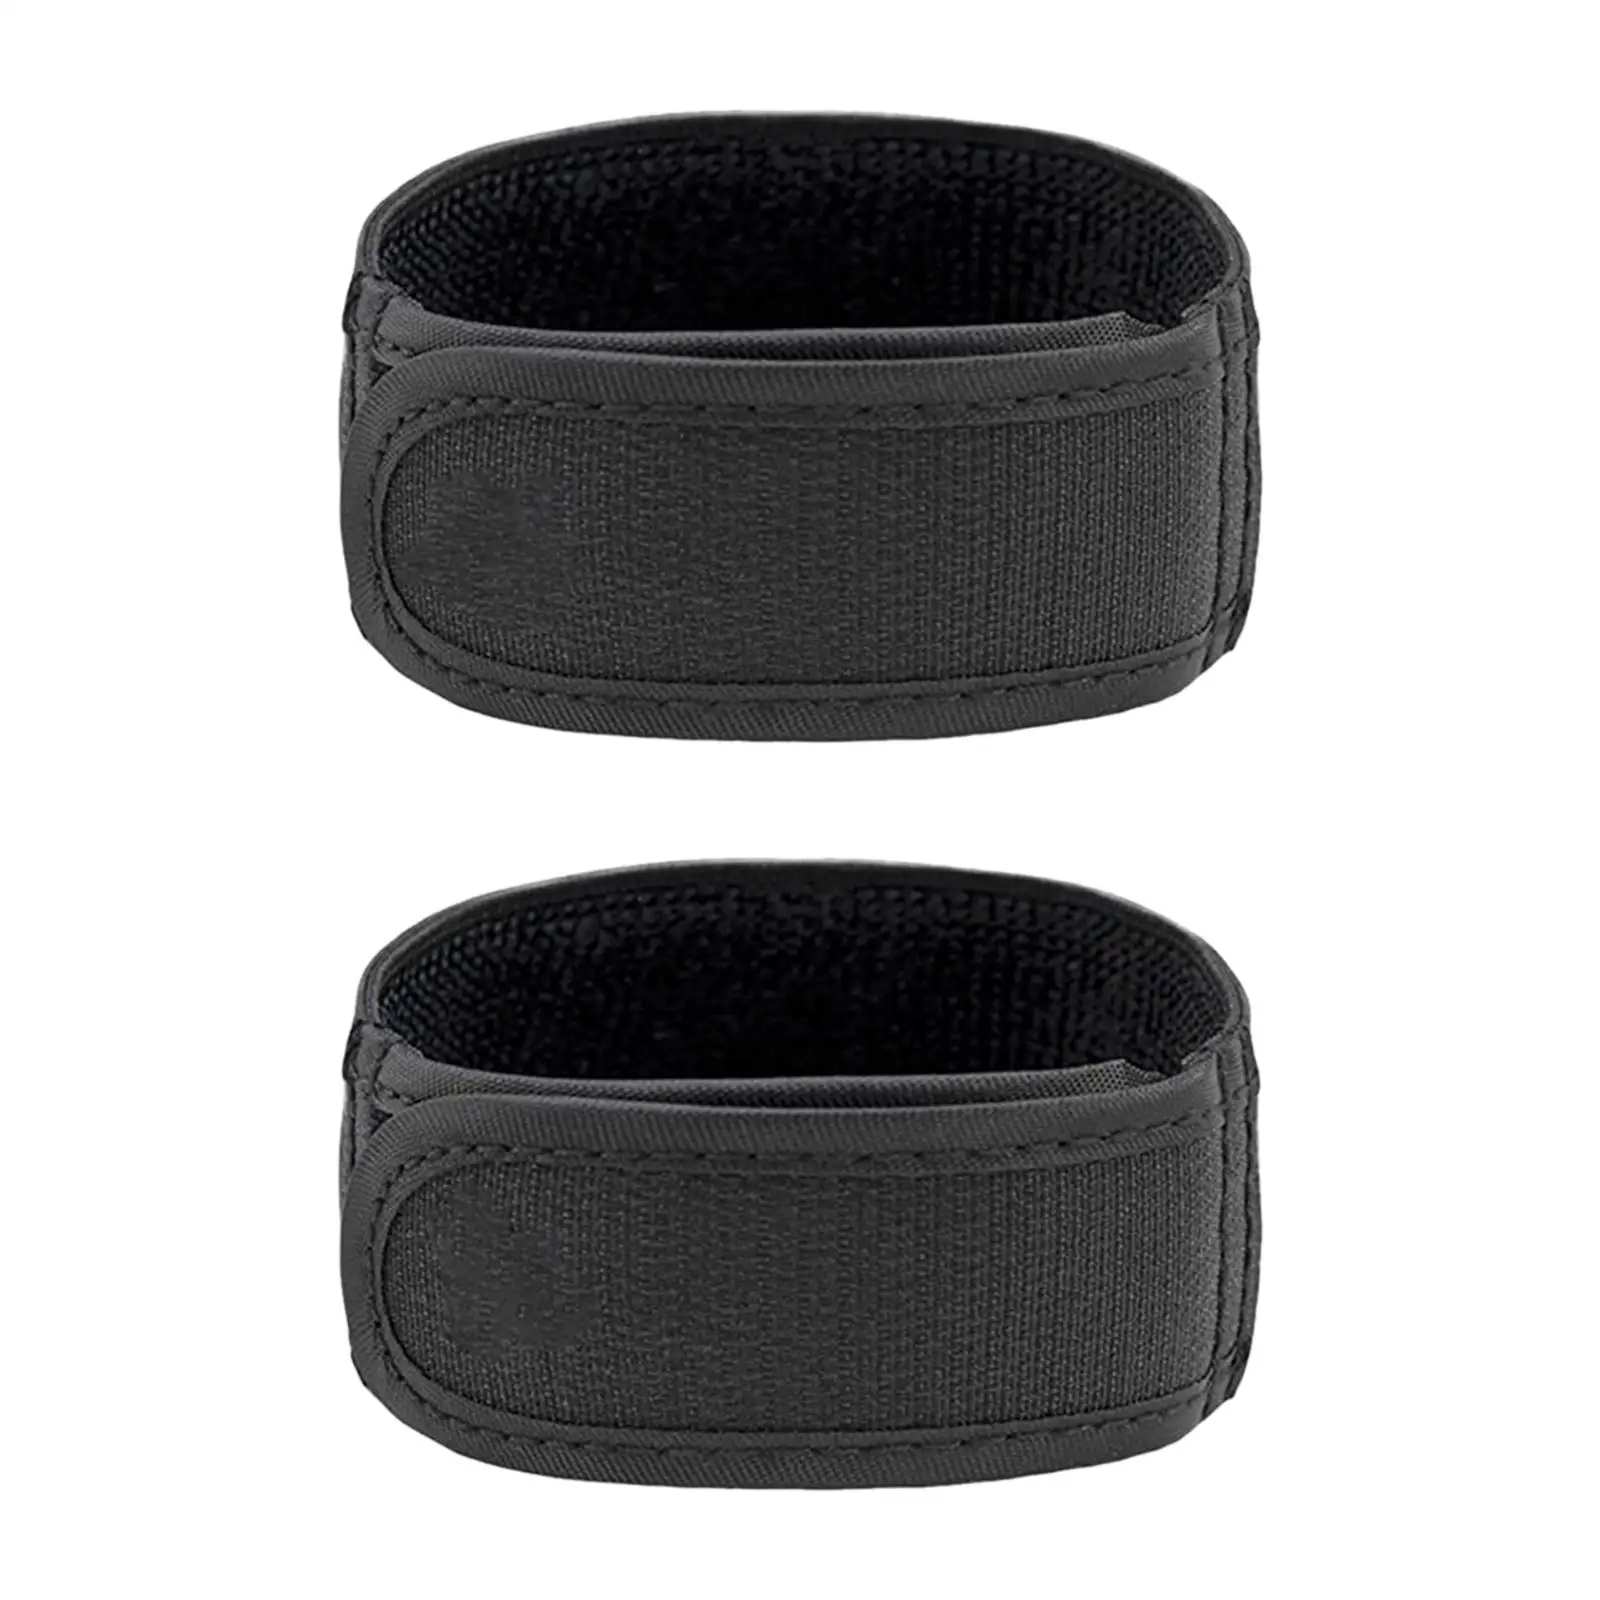 2Pcs No Buckle Elastic Belts Fits 2.5cm Belt Loops Stretchy Belt Waistband Buckle Free Waist Belts for Outdoor Sports Riding